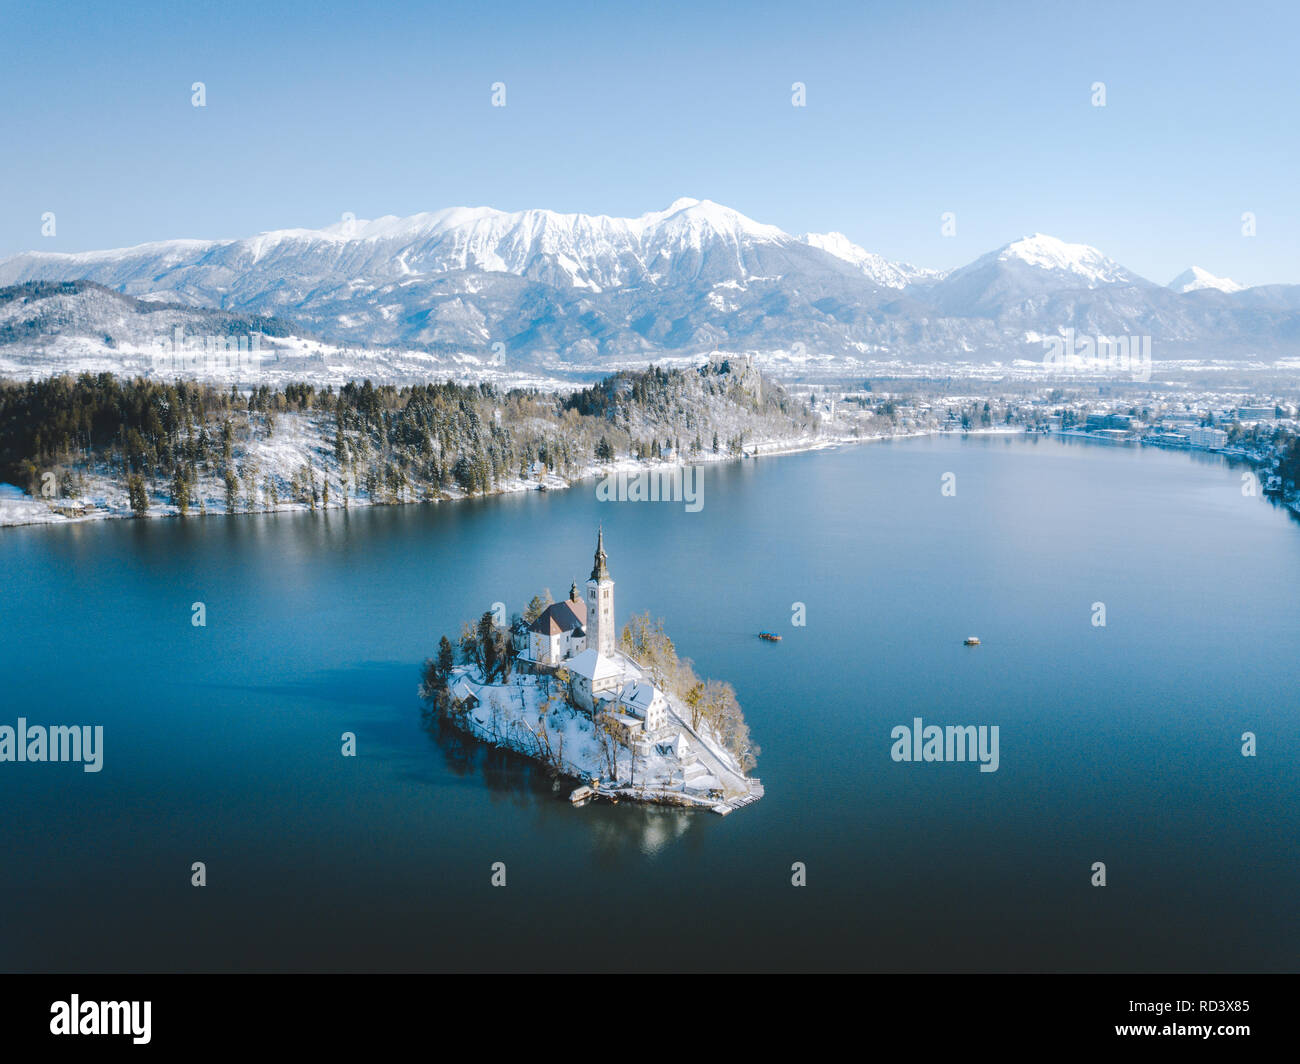 Panoramic view of scenic Lake Bled with famous Bled Island and castle (Blejski grad) in the background on a beautiful sunny day in winter, Slovenia Stock Photo